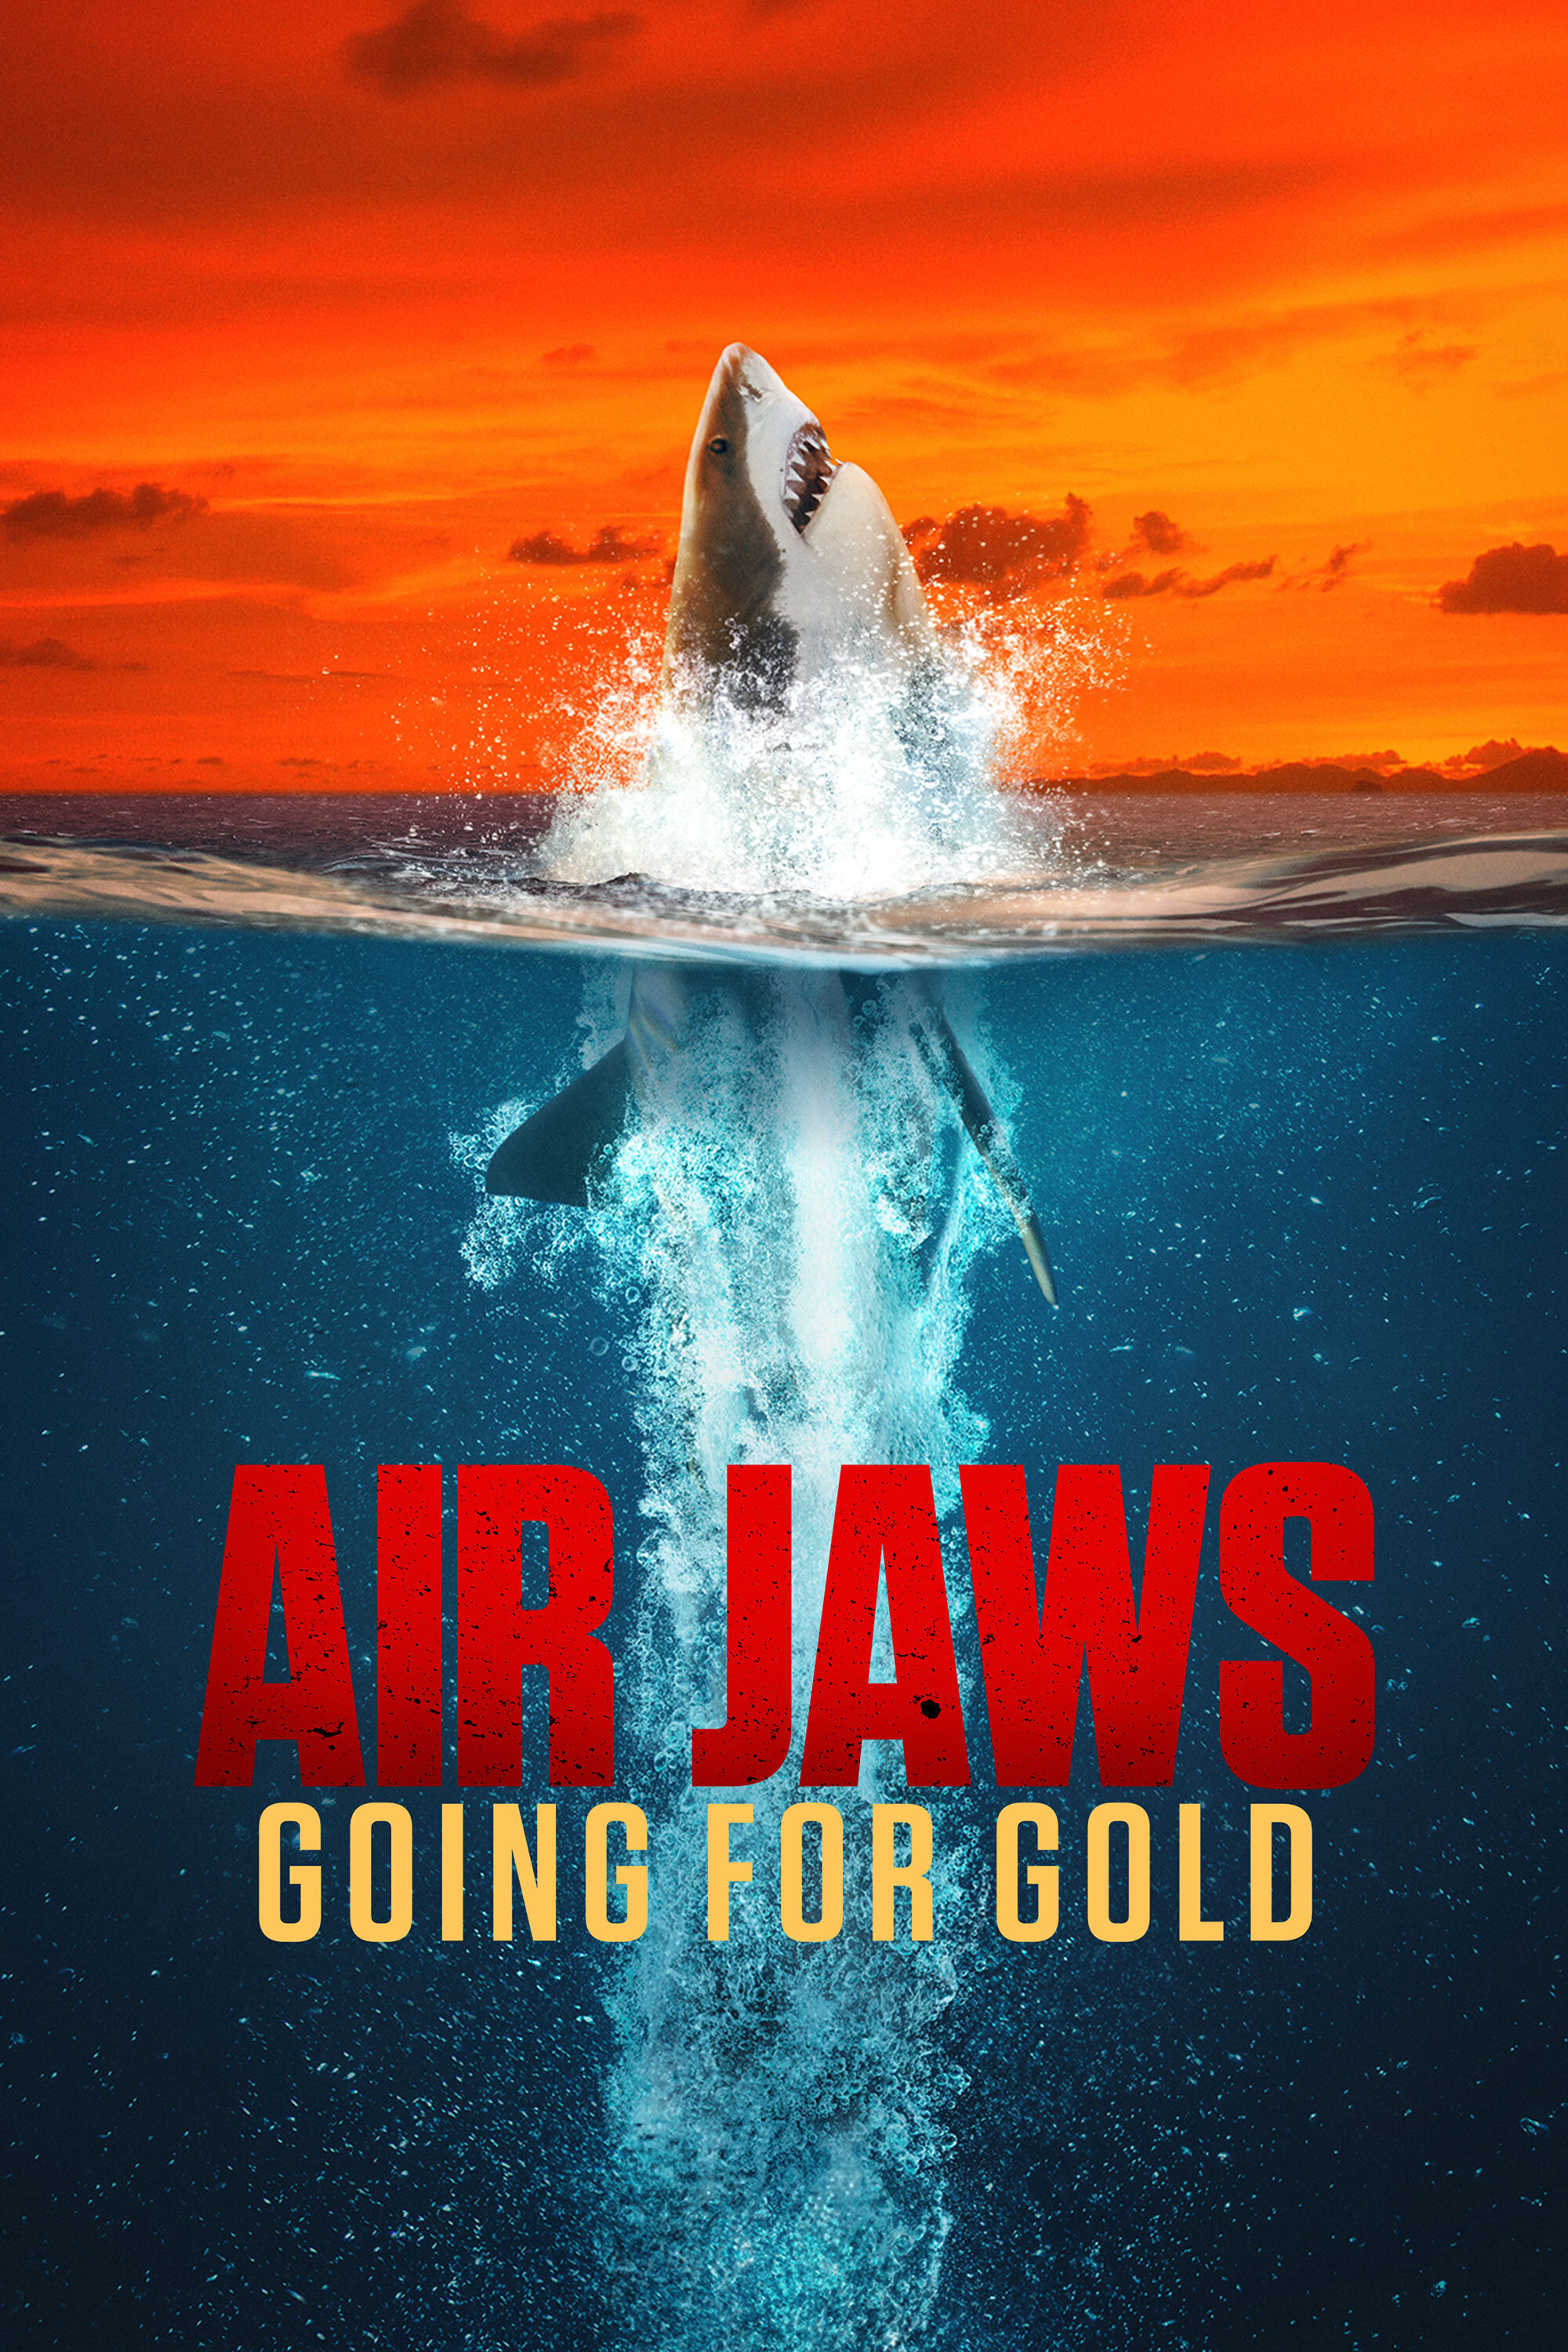 Air Jaws - Going for Gold